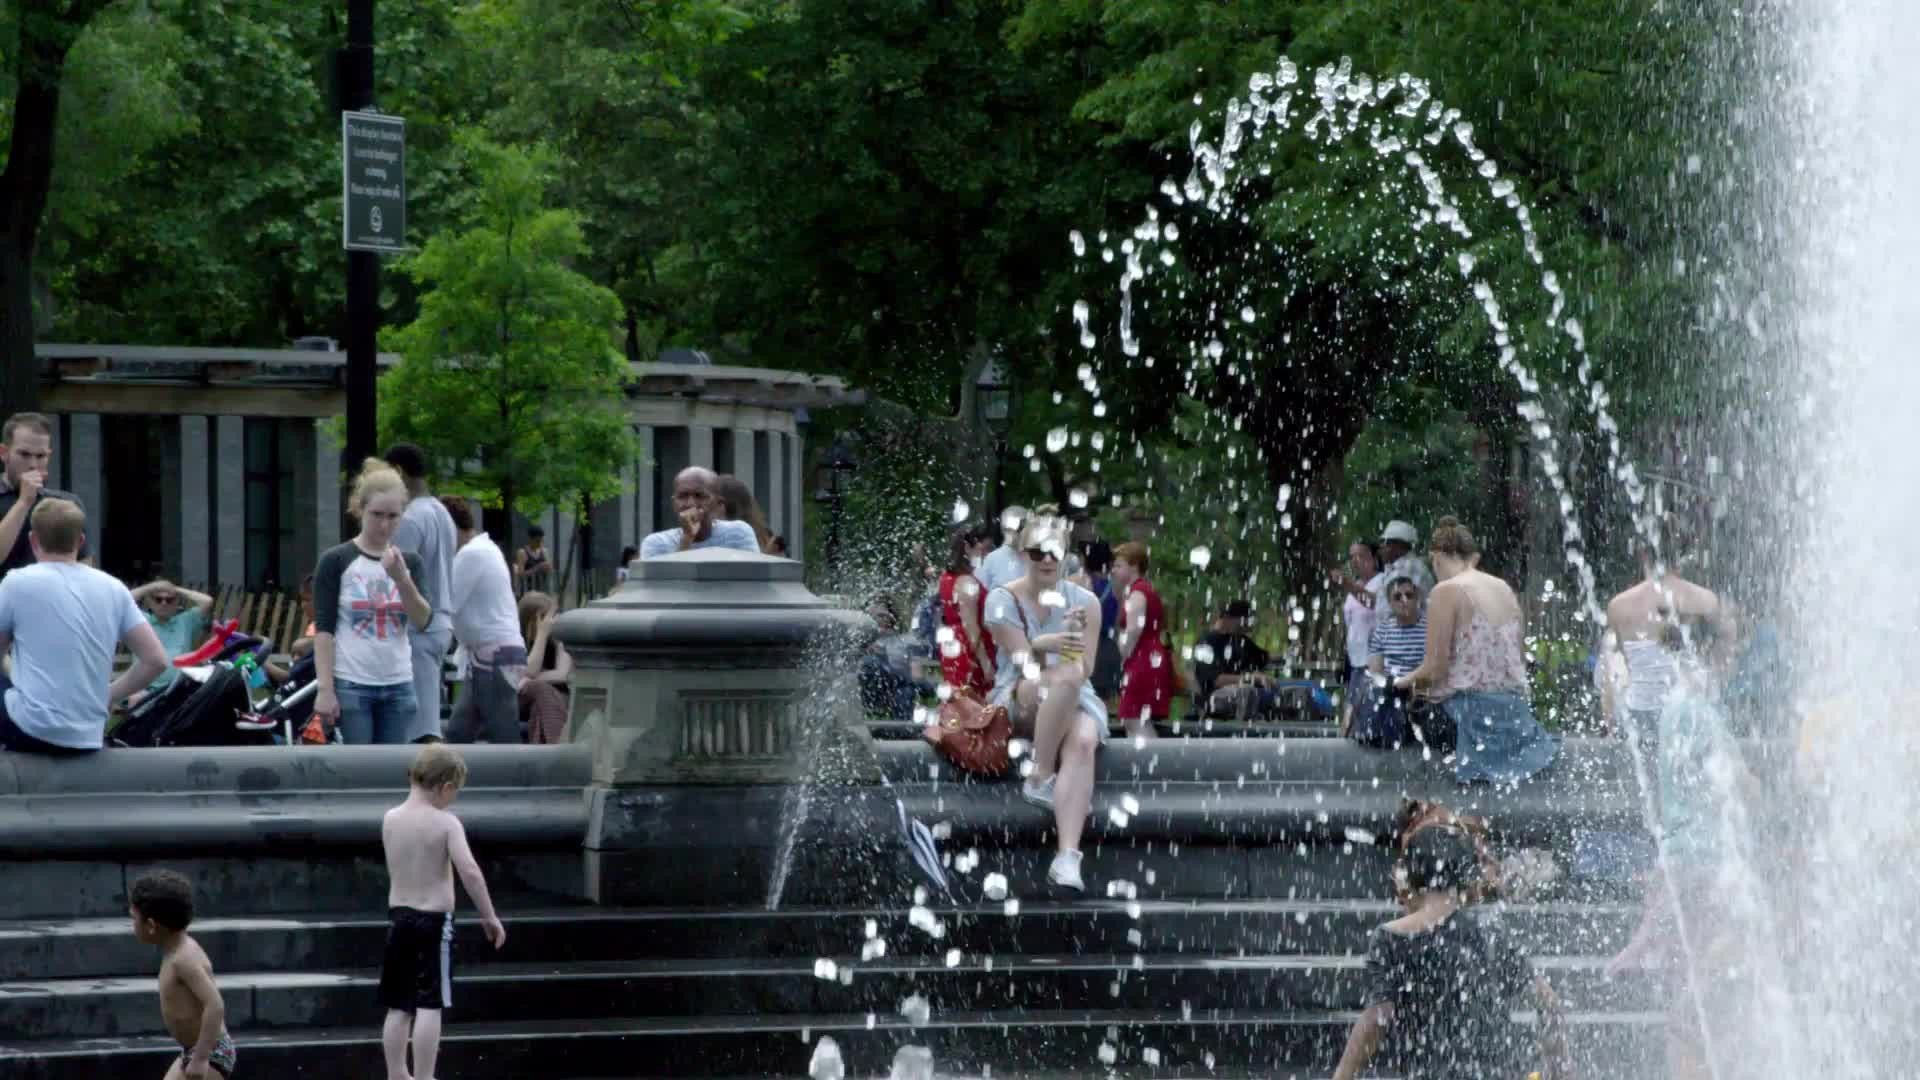 water fountain in Washington Square Park on summer day in NYC